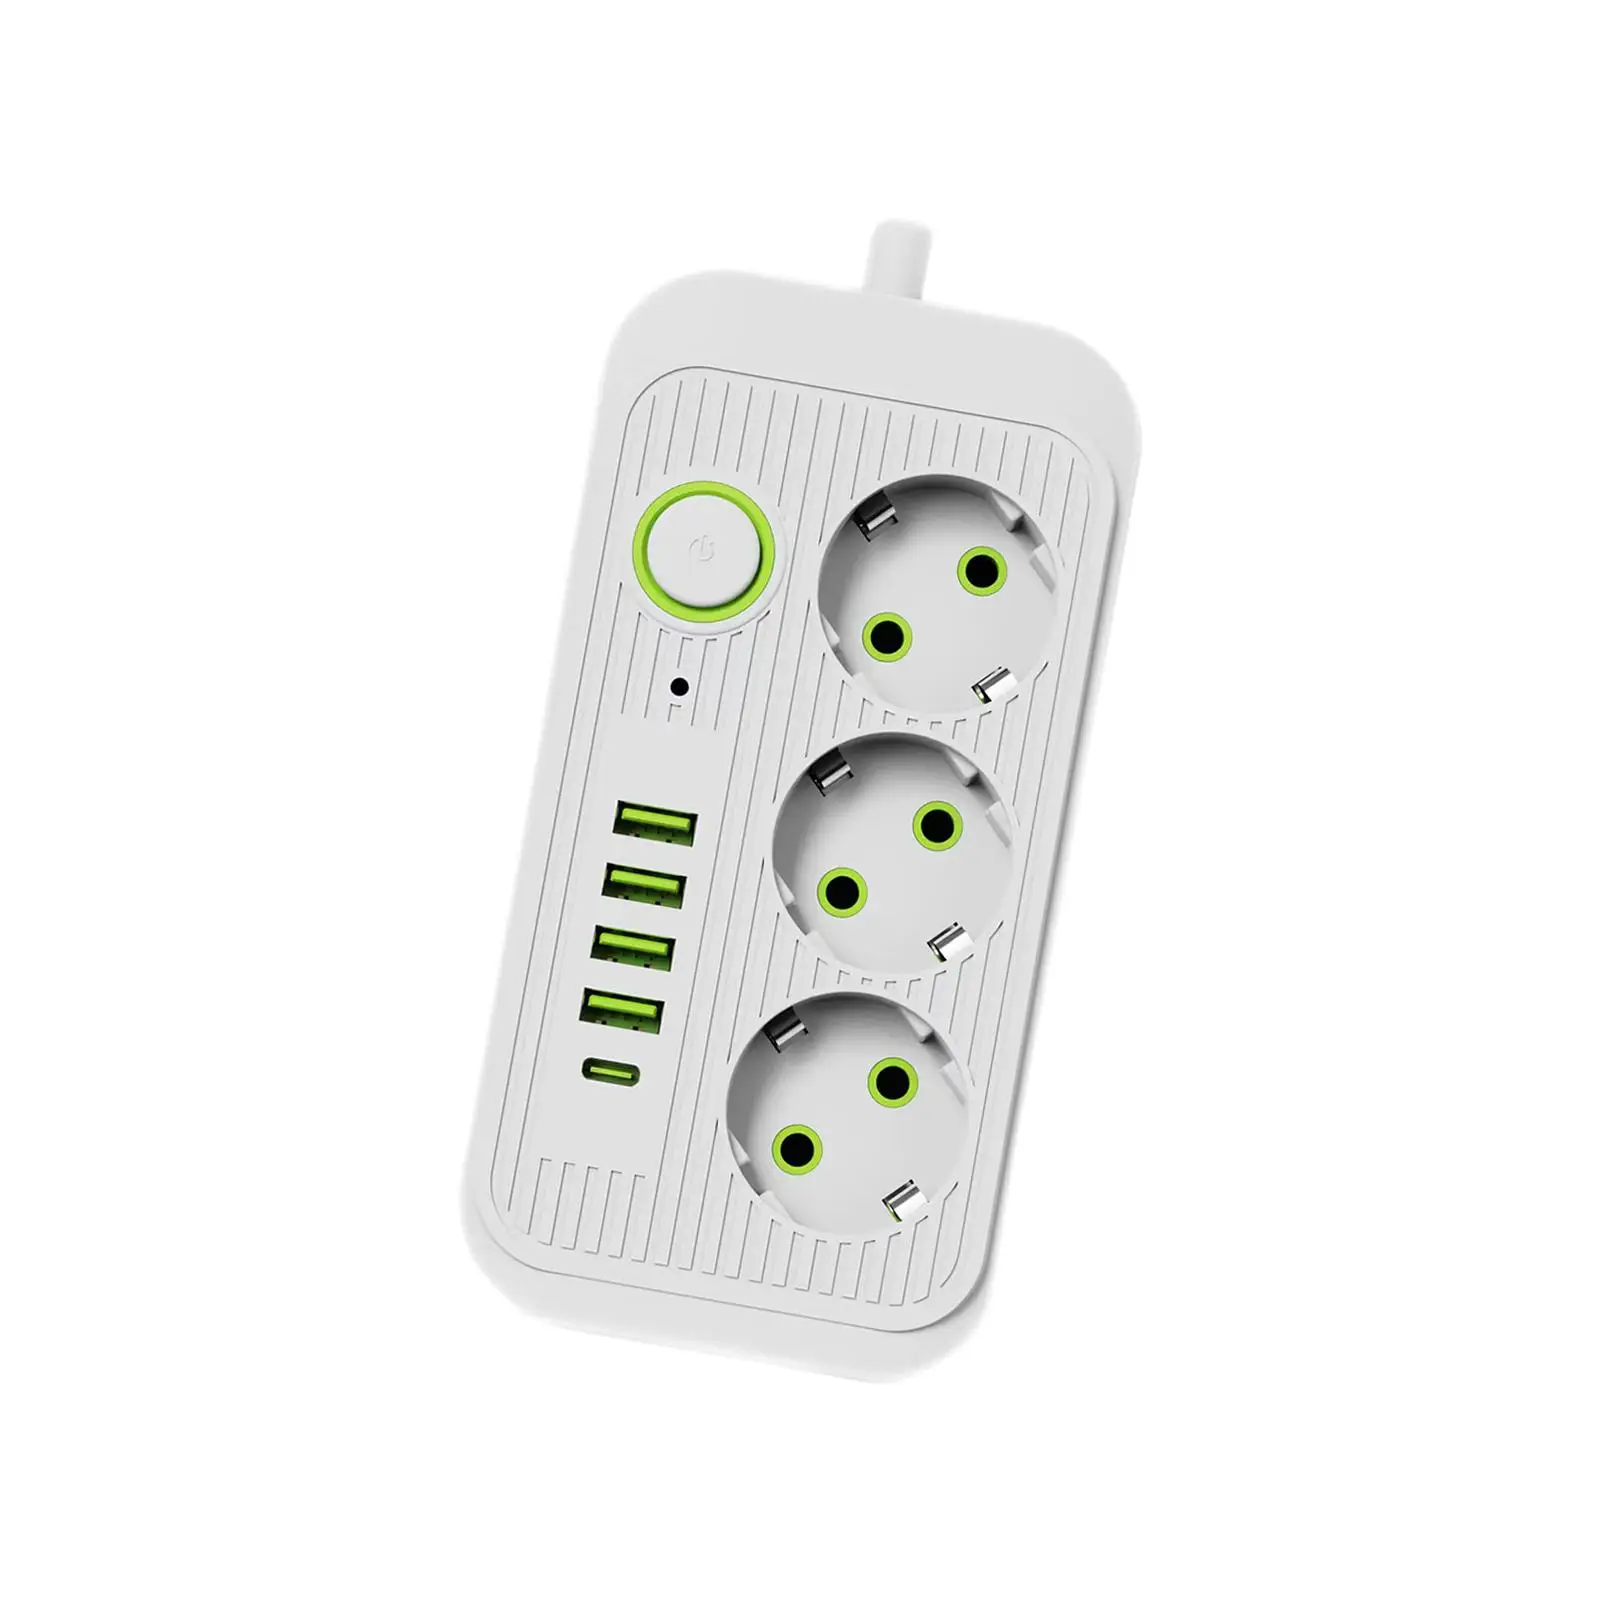 EU Adapter with 4 USB Multiple Plug Base Power Strip Outlets Electrical Plug Base for Phone Computer Home Camera